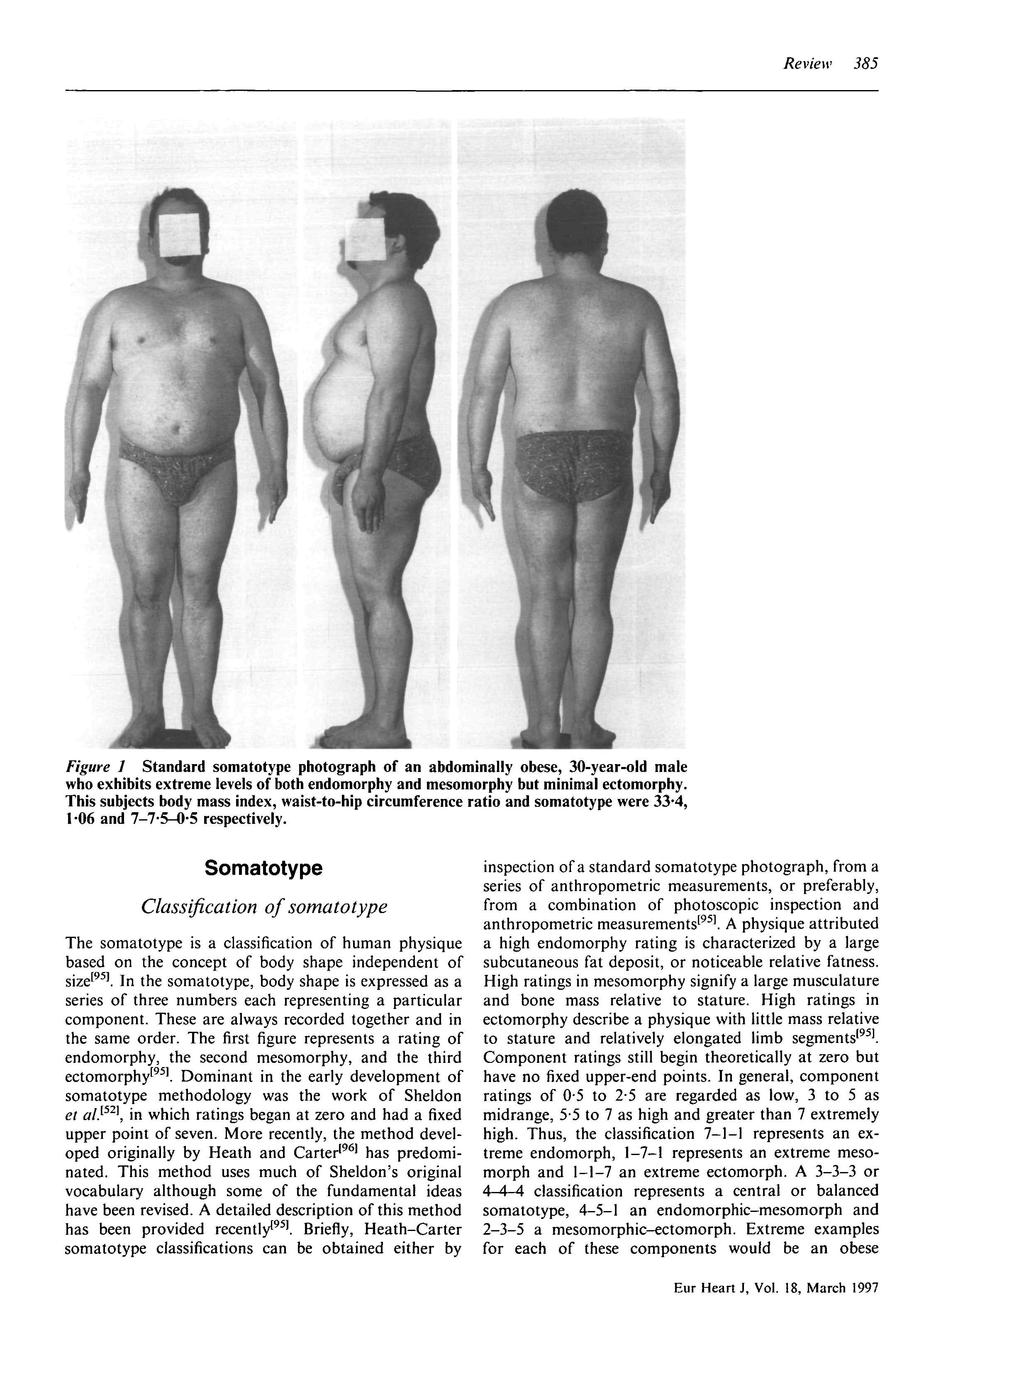 Review 385 Figure 1 Standard somatotype photograph of an abdominally obese, 30-year-old male who exhibits extreme levels of both endomorphy and mesomorphy but minimal ectomorphy.